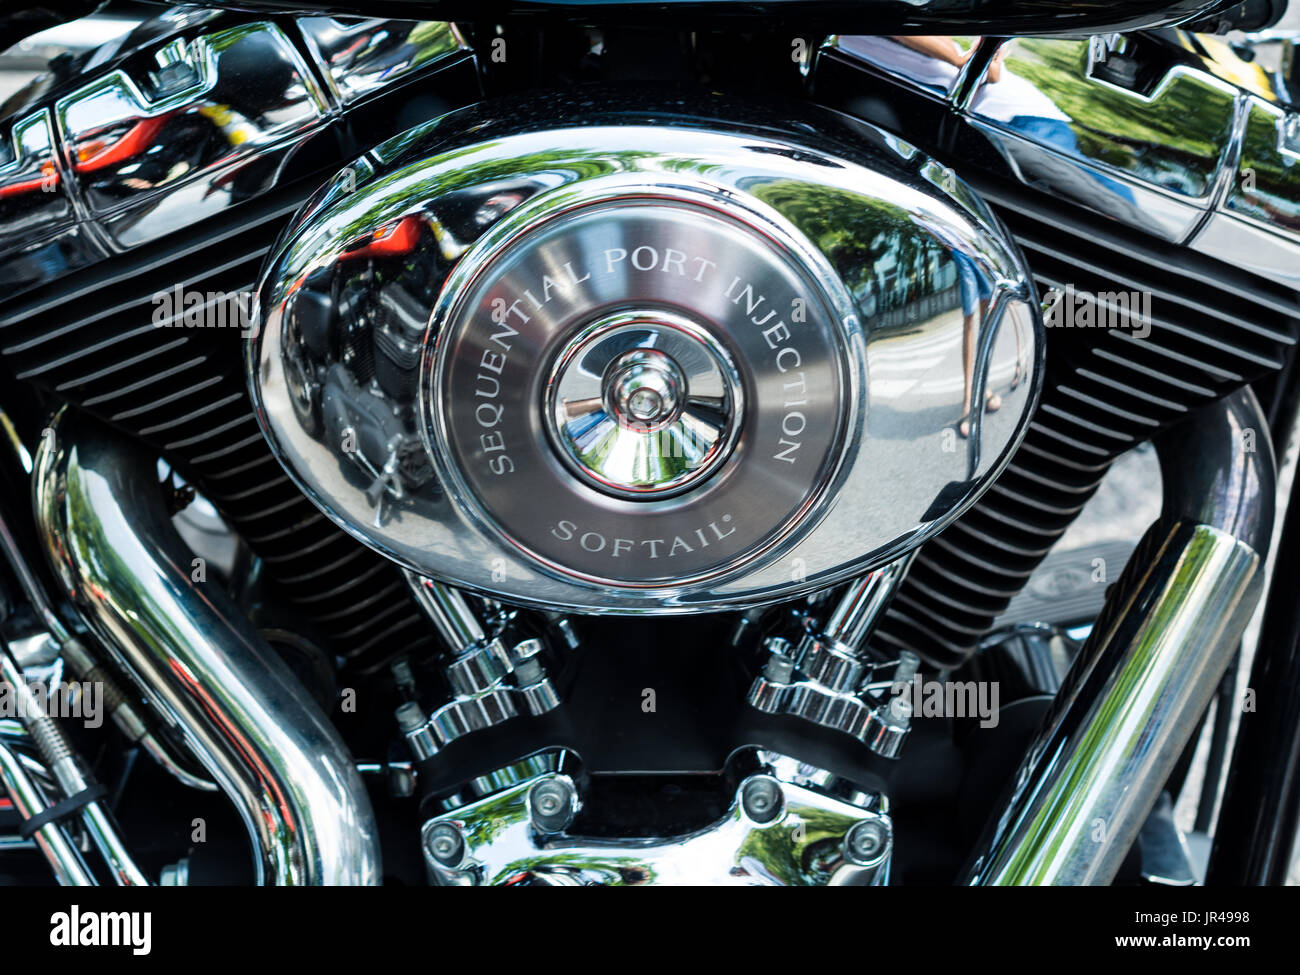 Show classic american motorcycles. Motorcycle parts details. Vintage filter effect Stock Photo